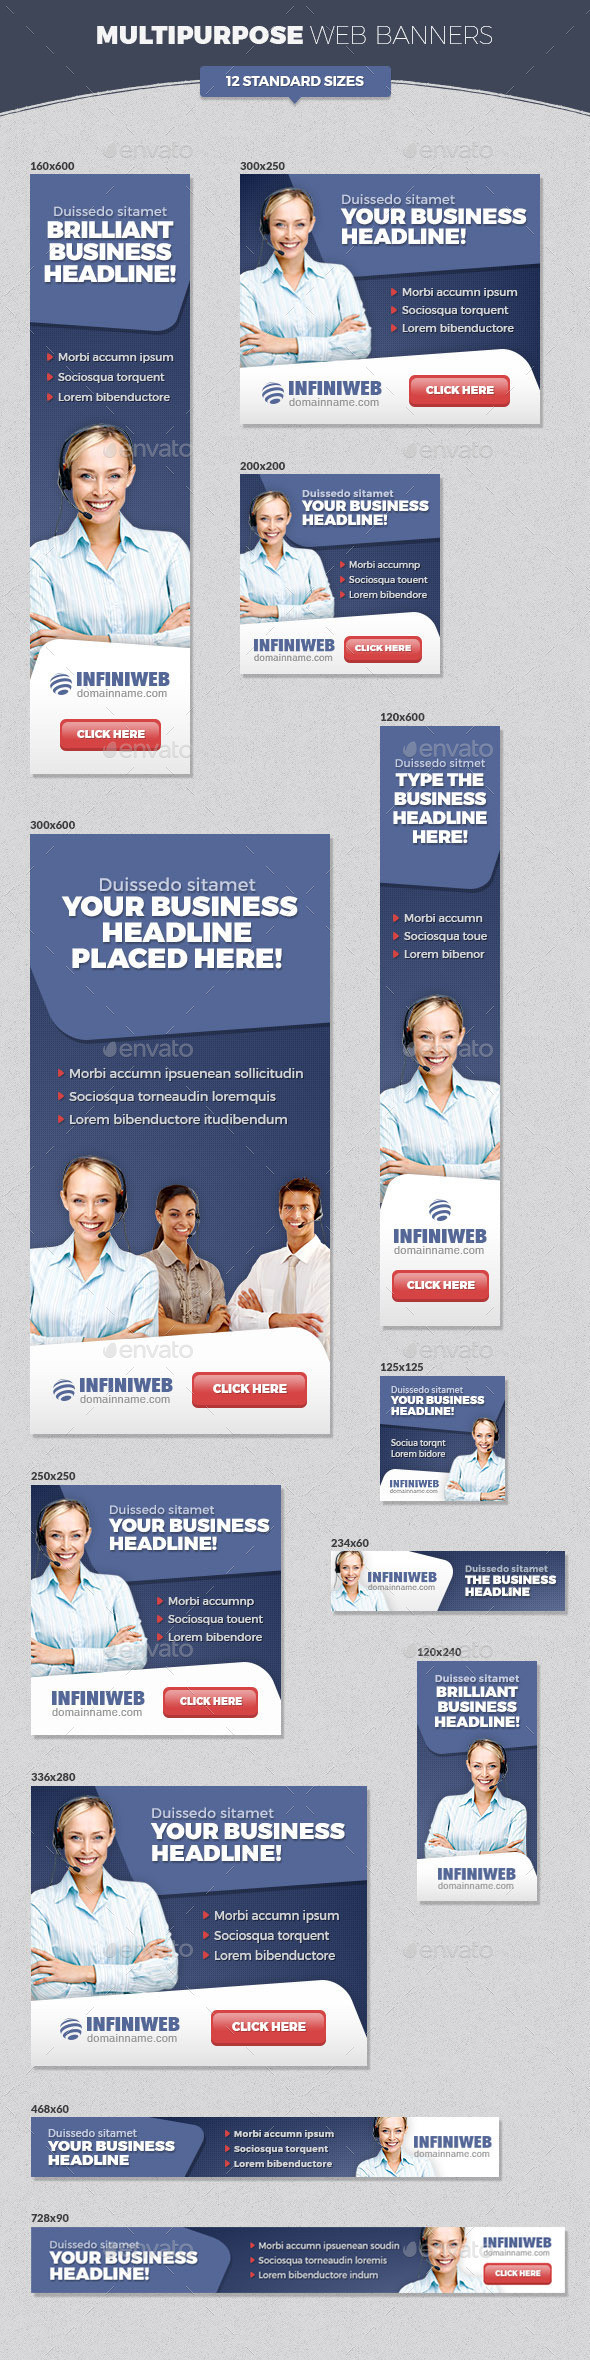 Preview multipurpose web banners